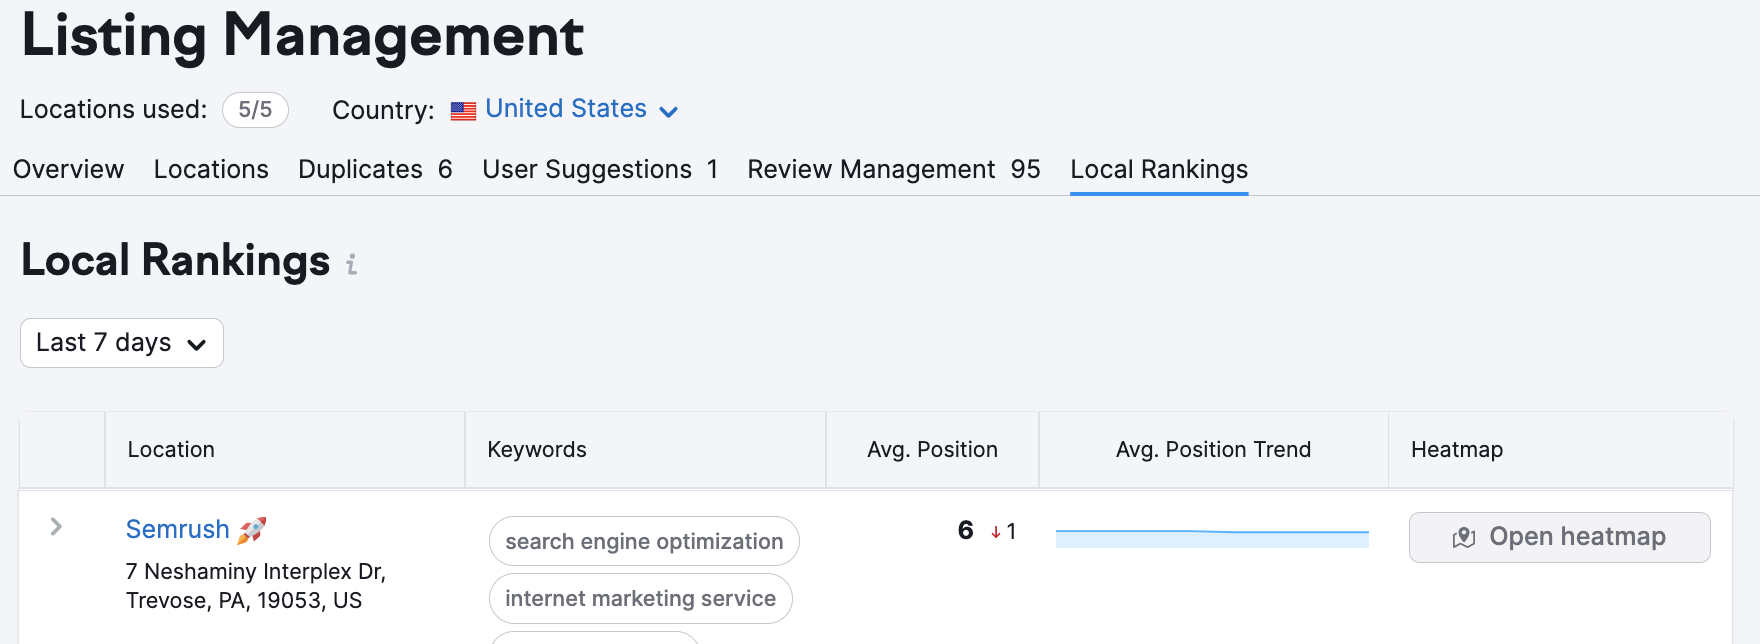 Listing Management Local Rankings image 1